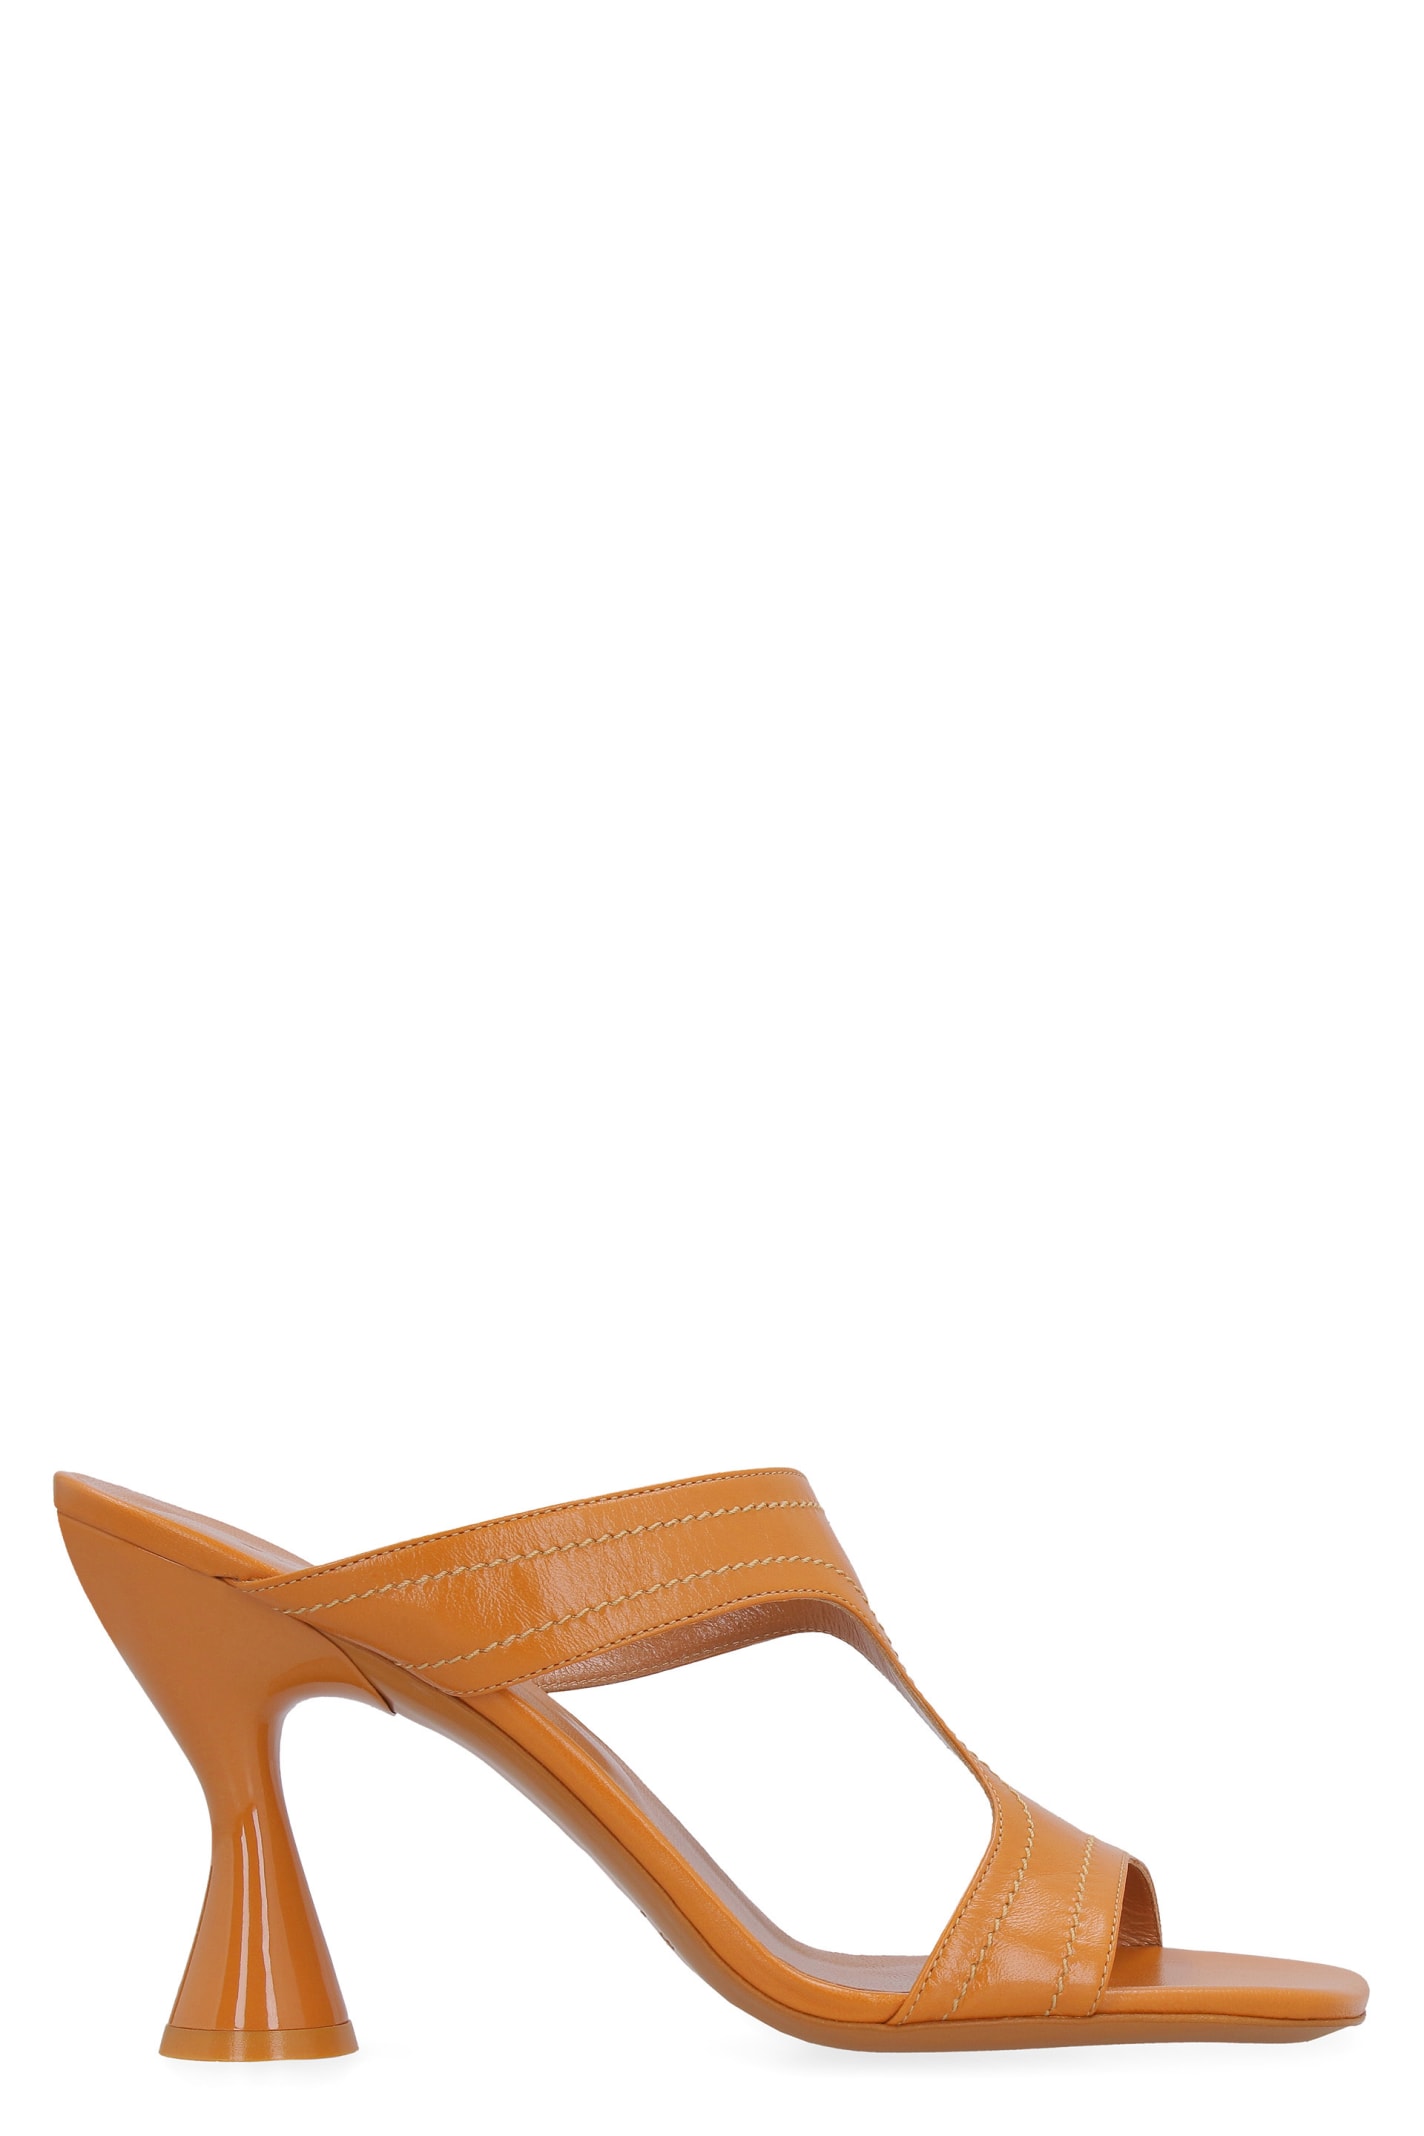 BY FAR Nadia Leather Mules